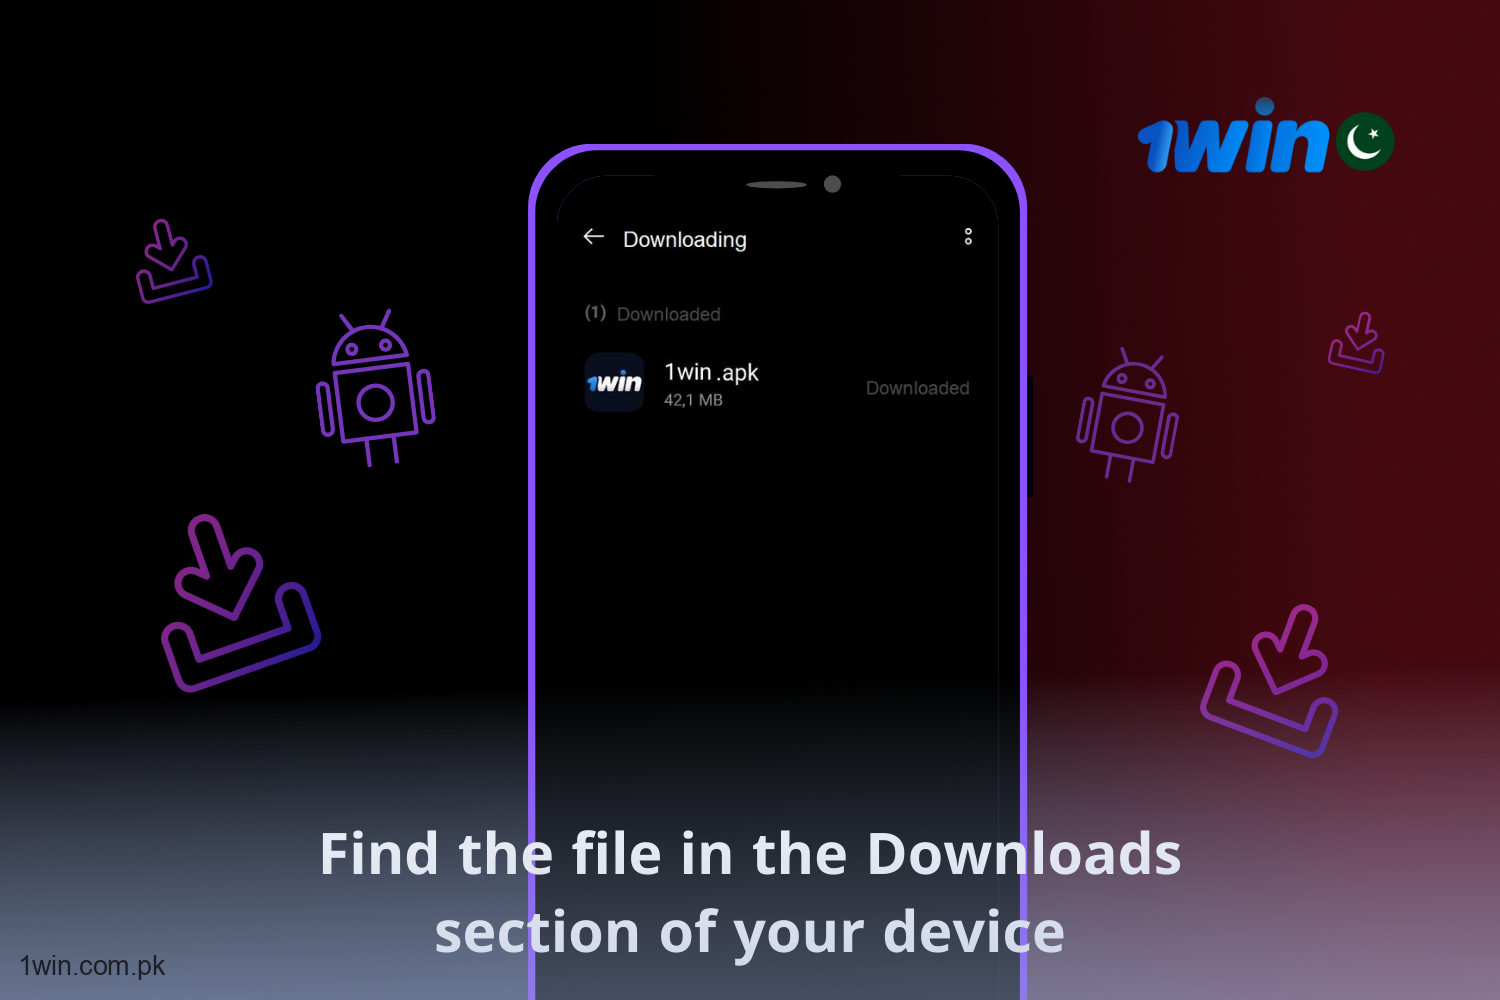 In order to download the application on Android, a user from Pakistan should find the file in the "Downloads" section of the device